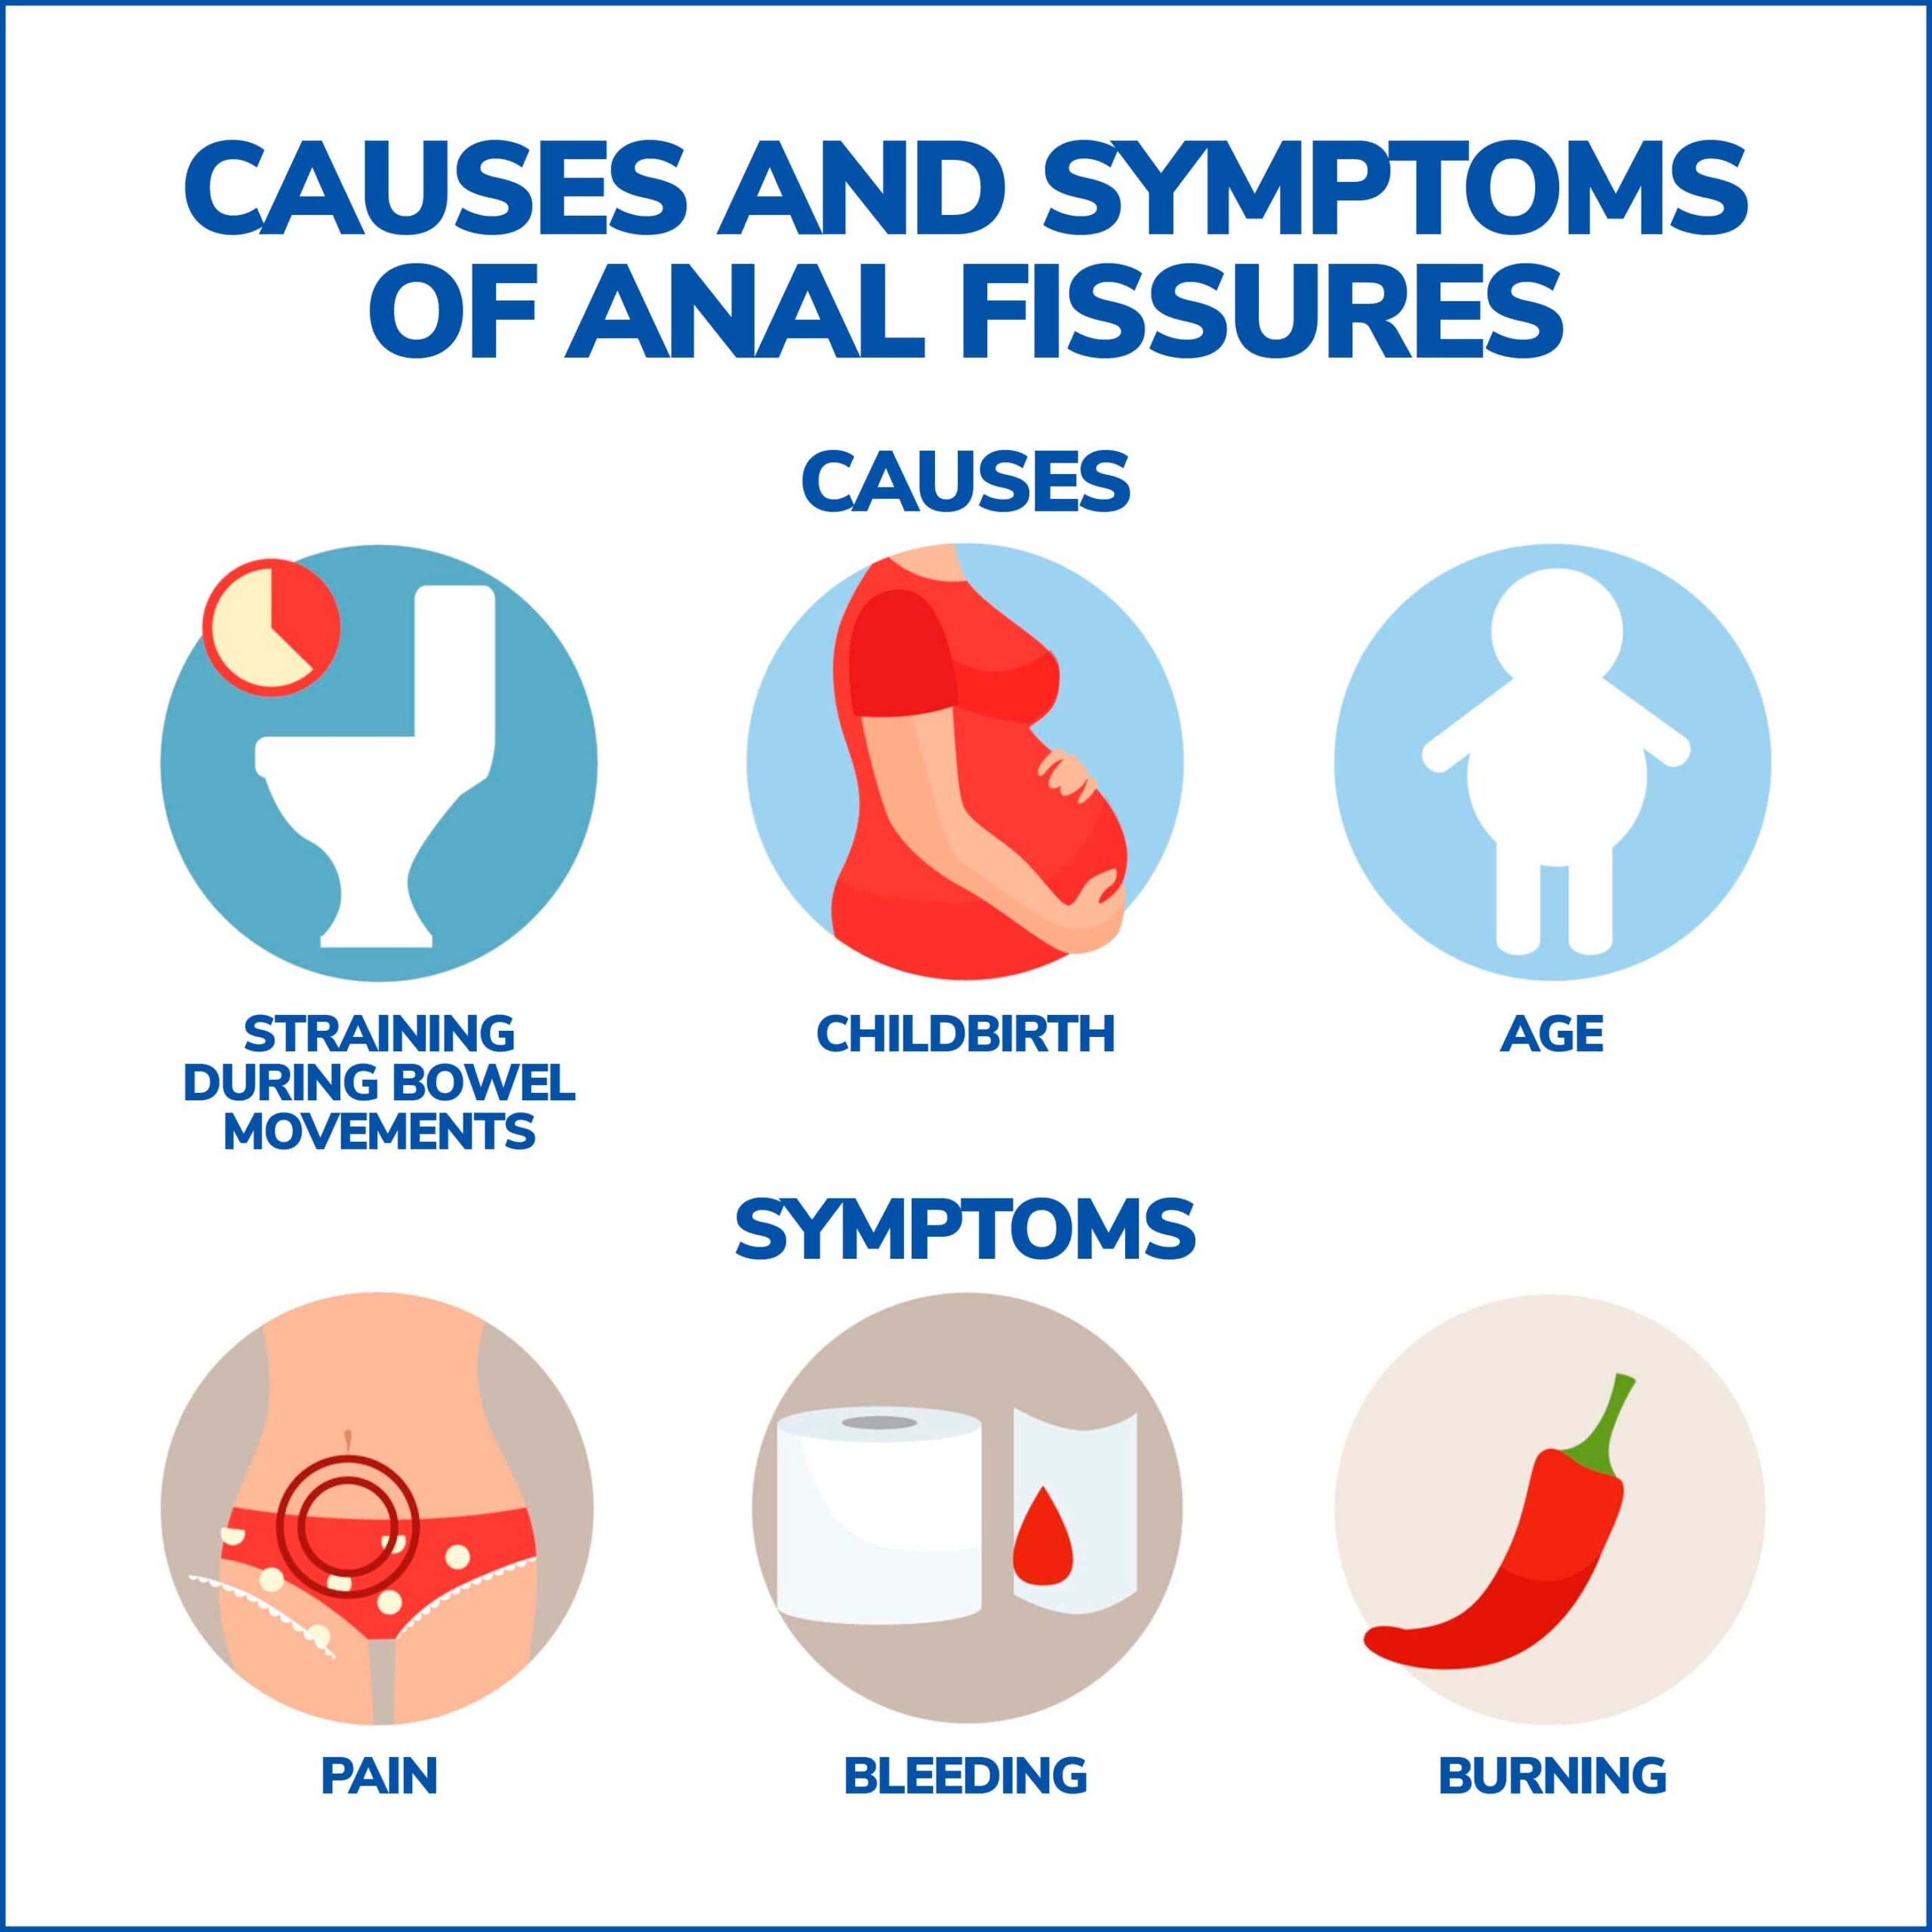 Causes and Symptoms of Anal Fissures